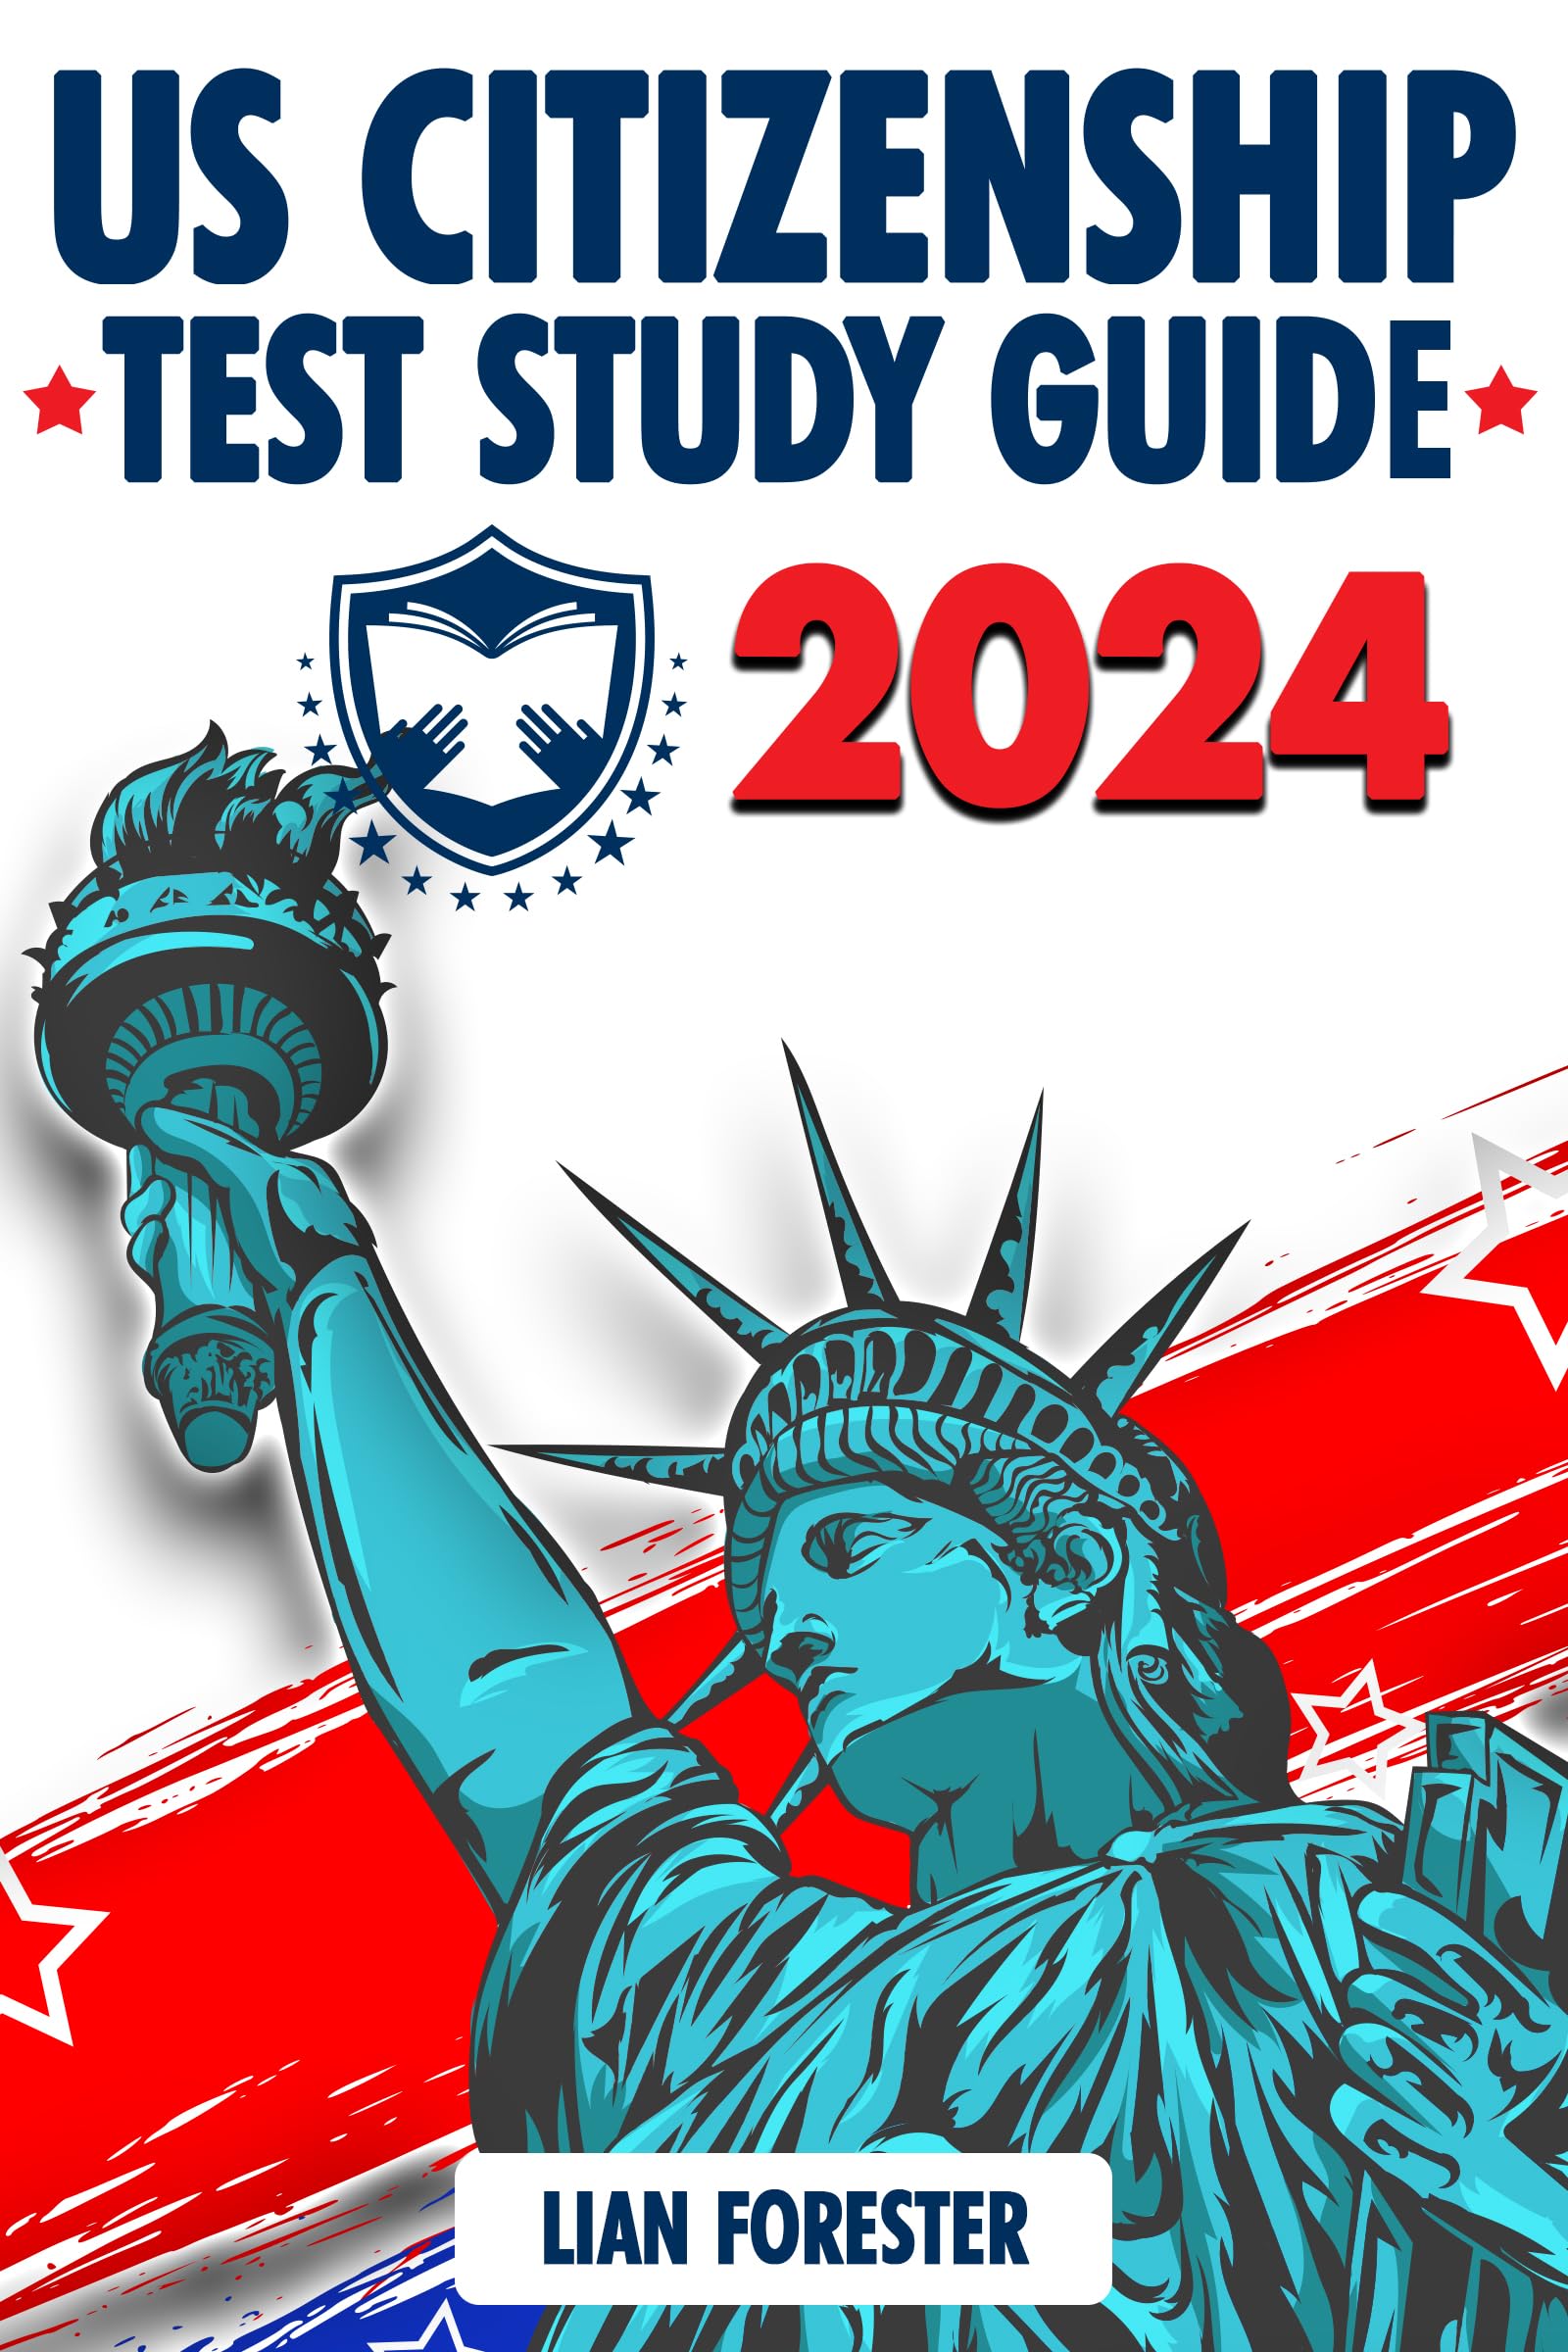 US Citizenship Test Study Guide 2024: Traverse the American Journey from Indigenous Tales to Modern Marvels, Punctuated with Challenging Quizzes